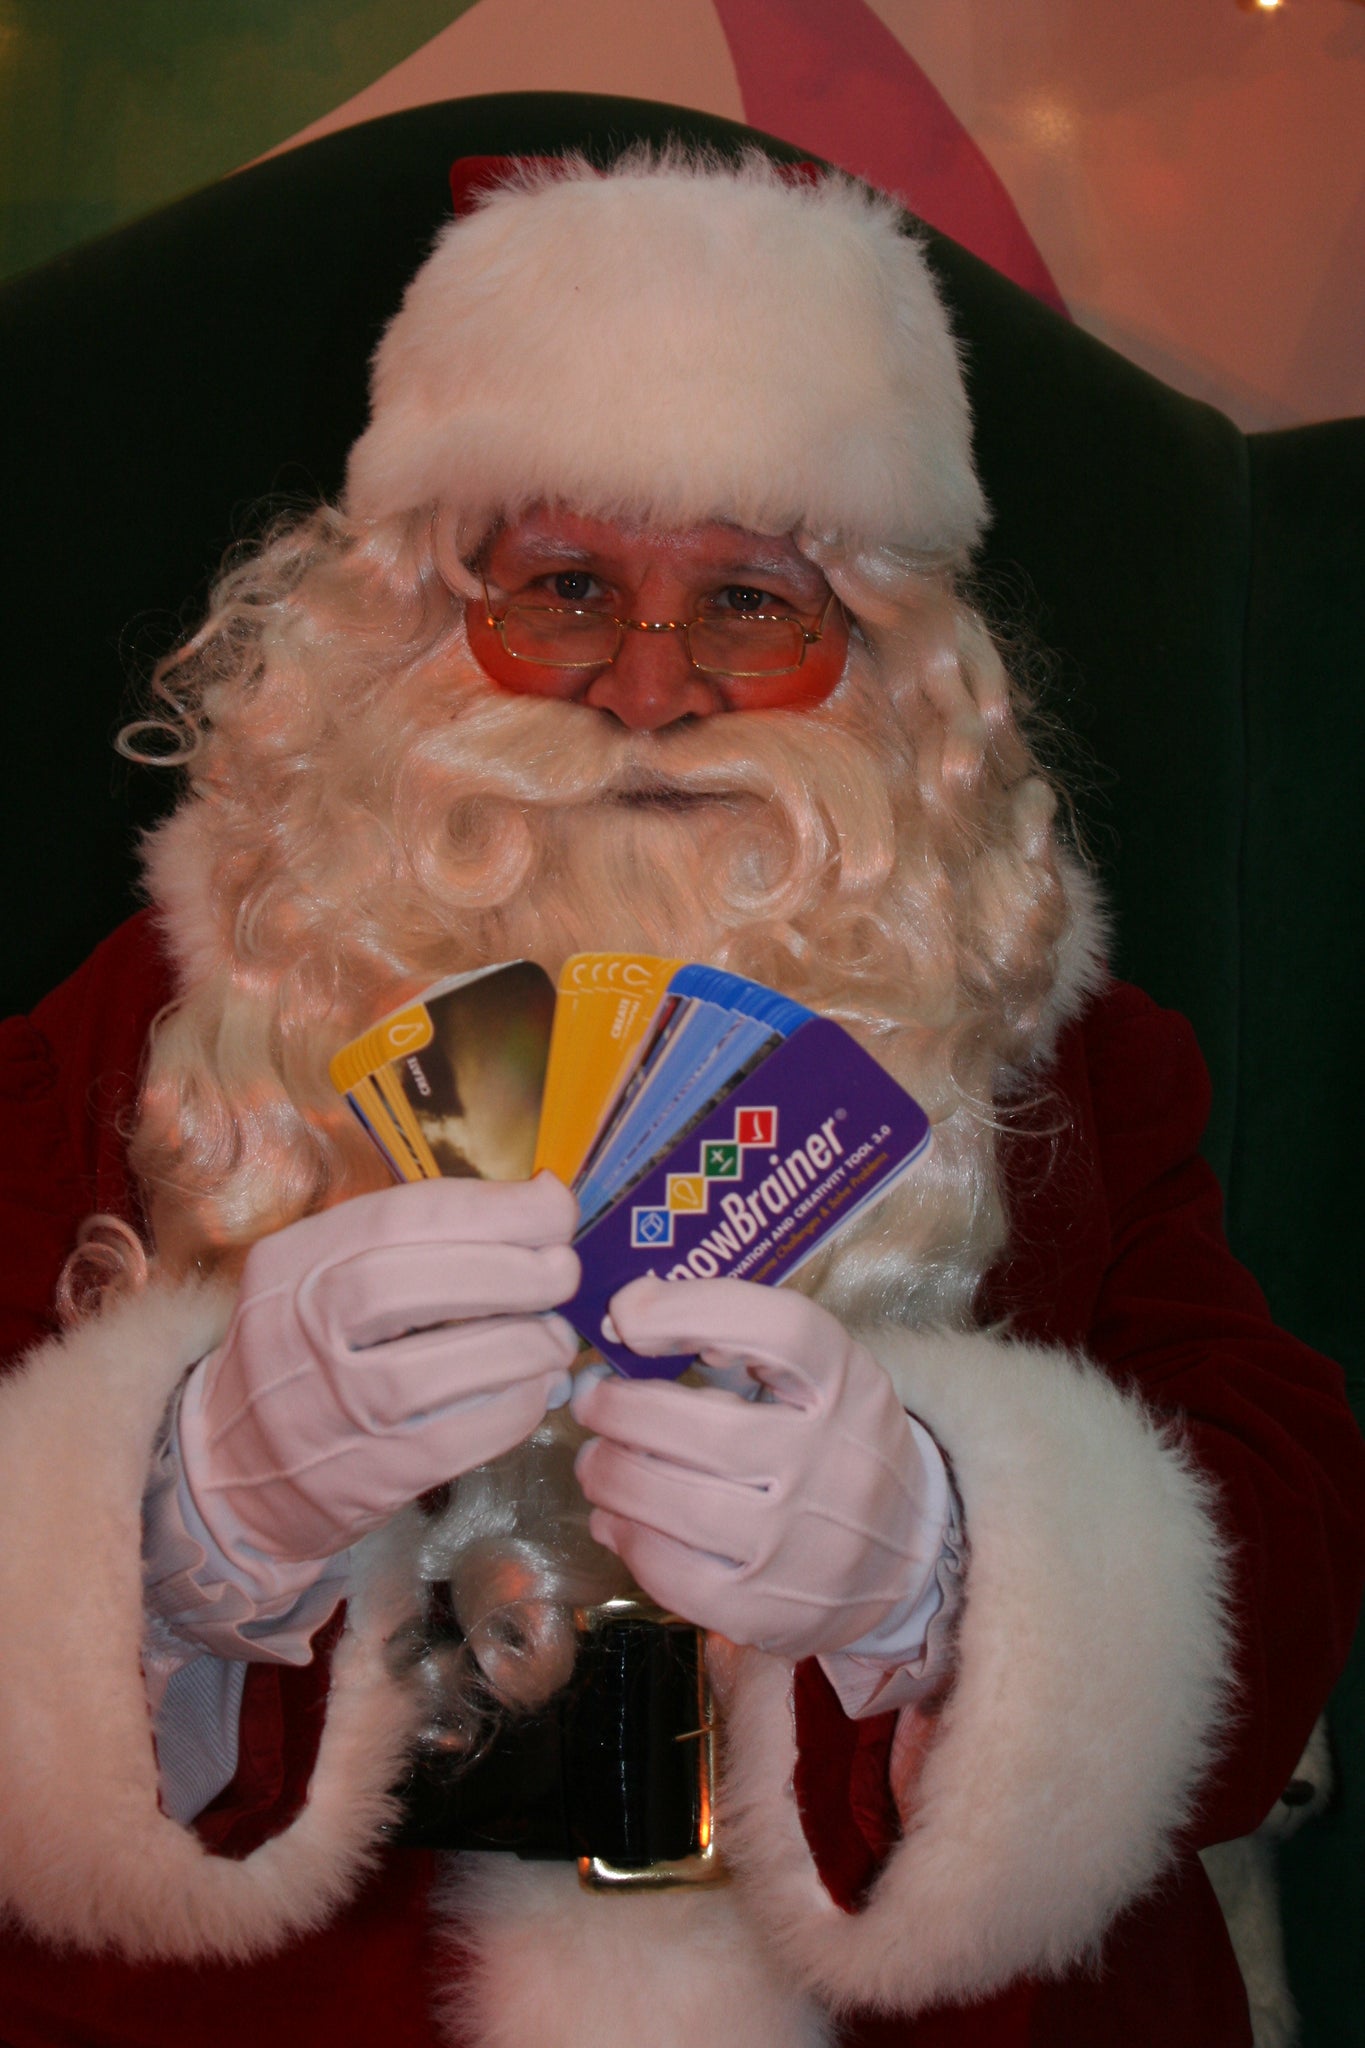 Santa Clause Recommends KnowBrainers for Holiday Gifts